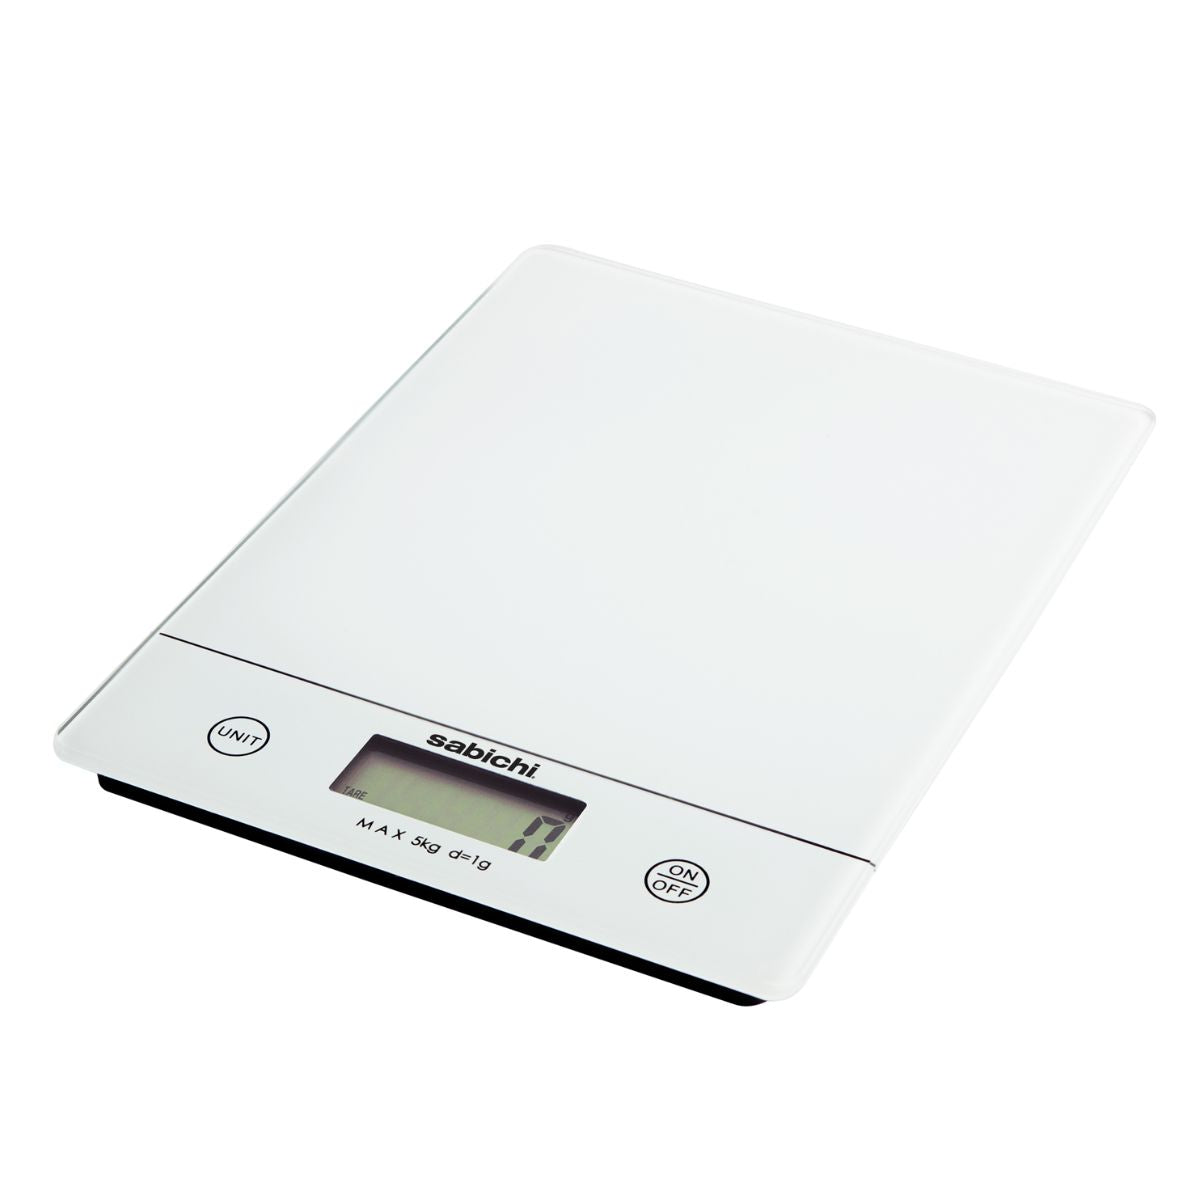 Sabichi - 5kg Digital Kitchen Scales - 1pcs isolated on a white background.